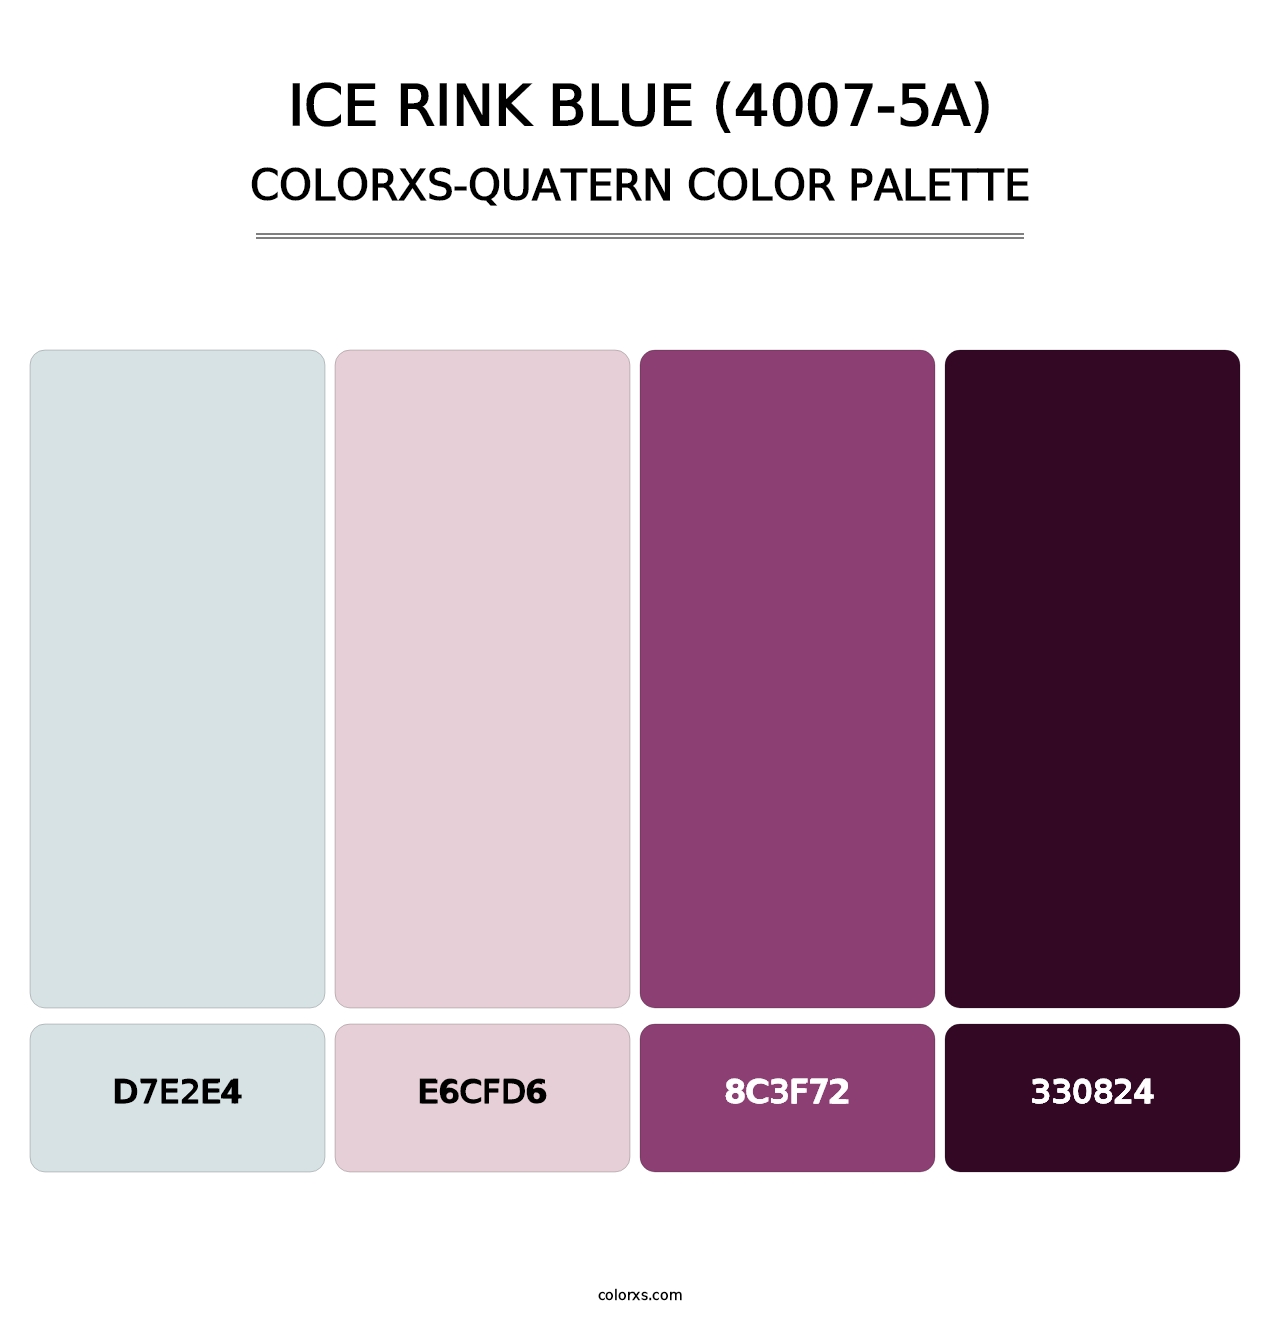 Ice Rink Blue (4007-5A) - Colorxs Quatern Palette